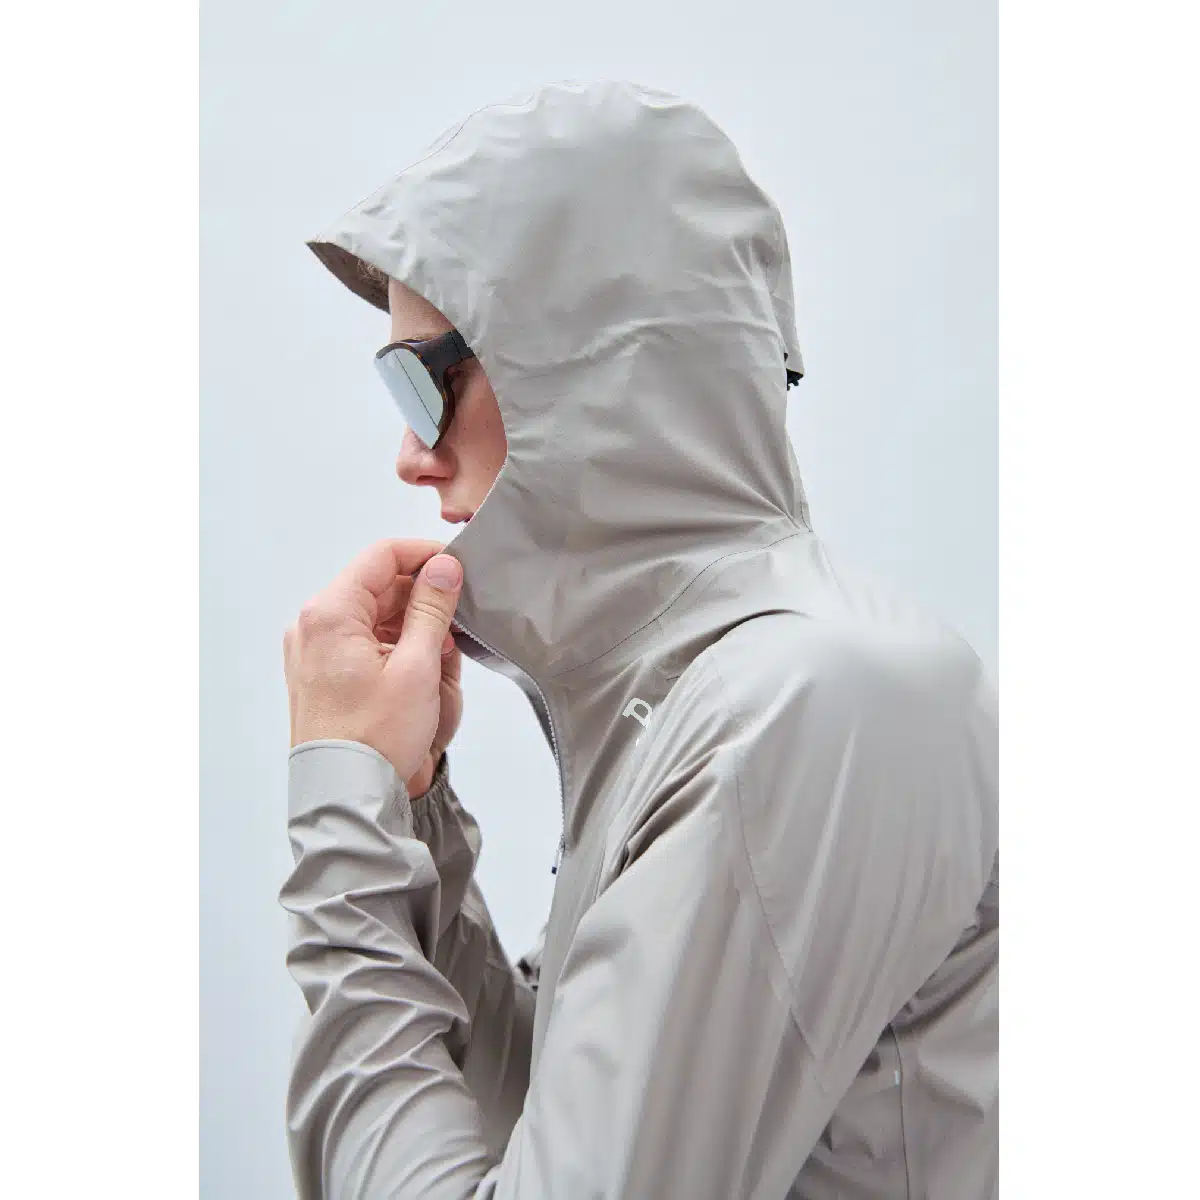 POC M's Signal All Weather Jacket hood pulled up